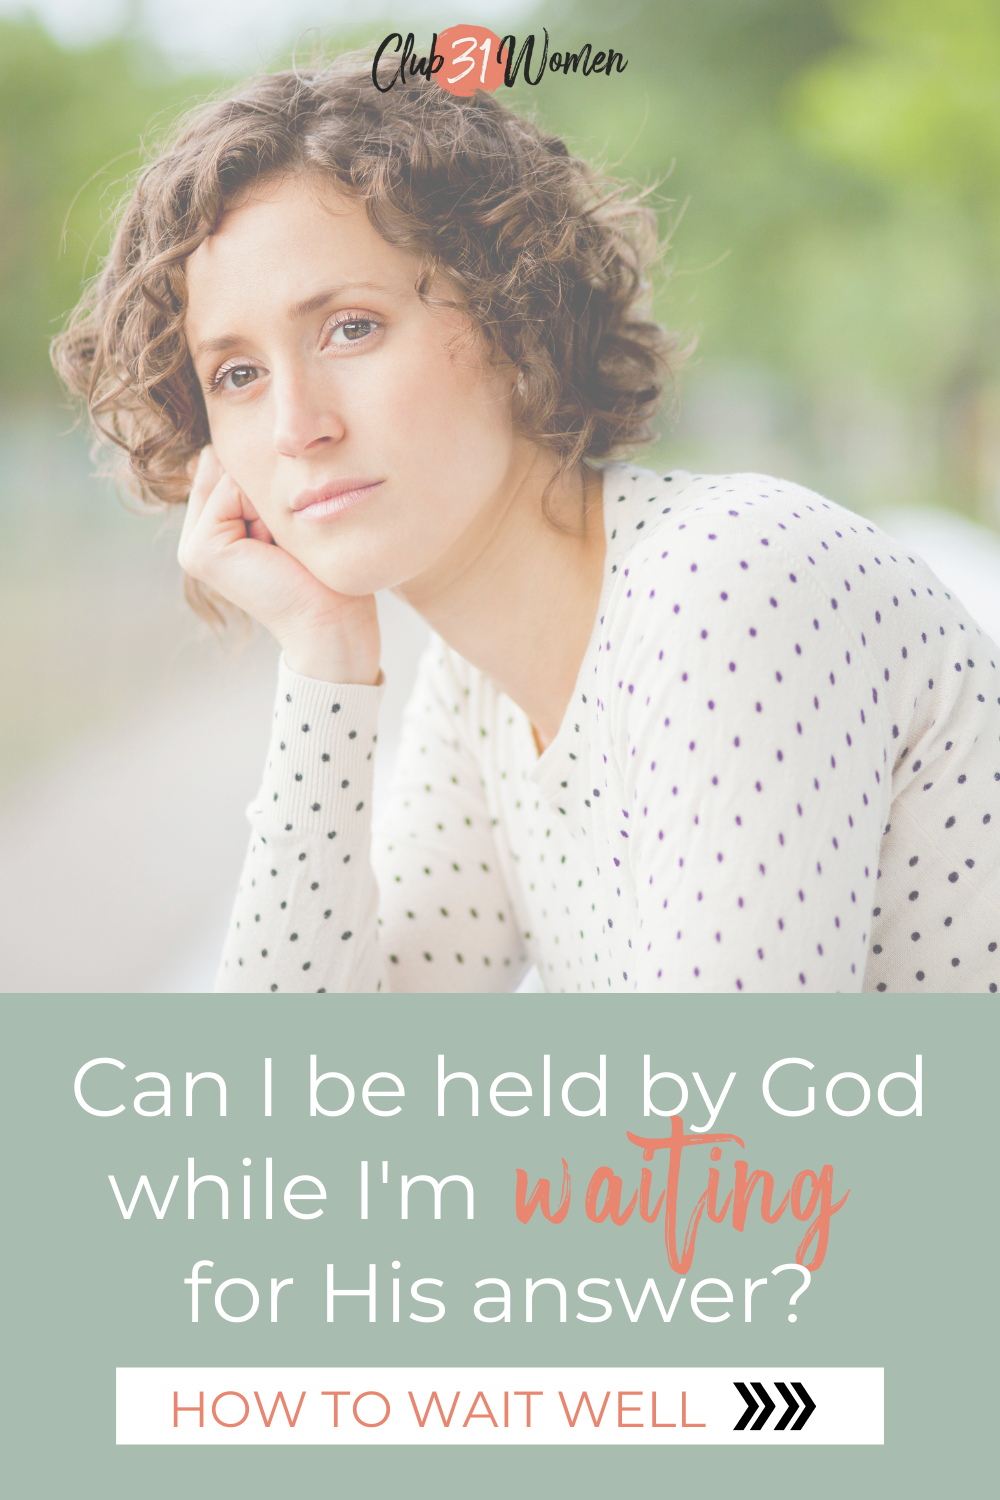 Waiting can be tense and uncomfortable, scary, and leave you feeling unsure. But what if we learned to wait differently? via @Club31Women